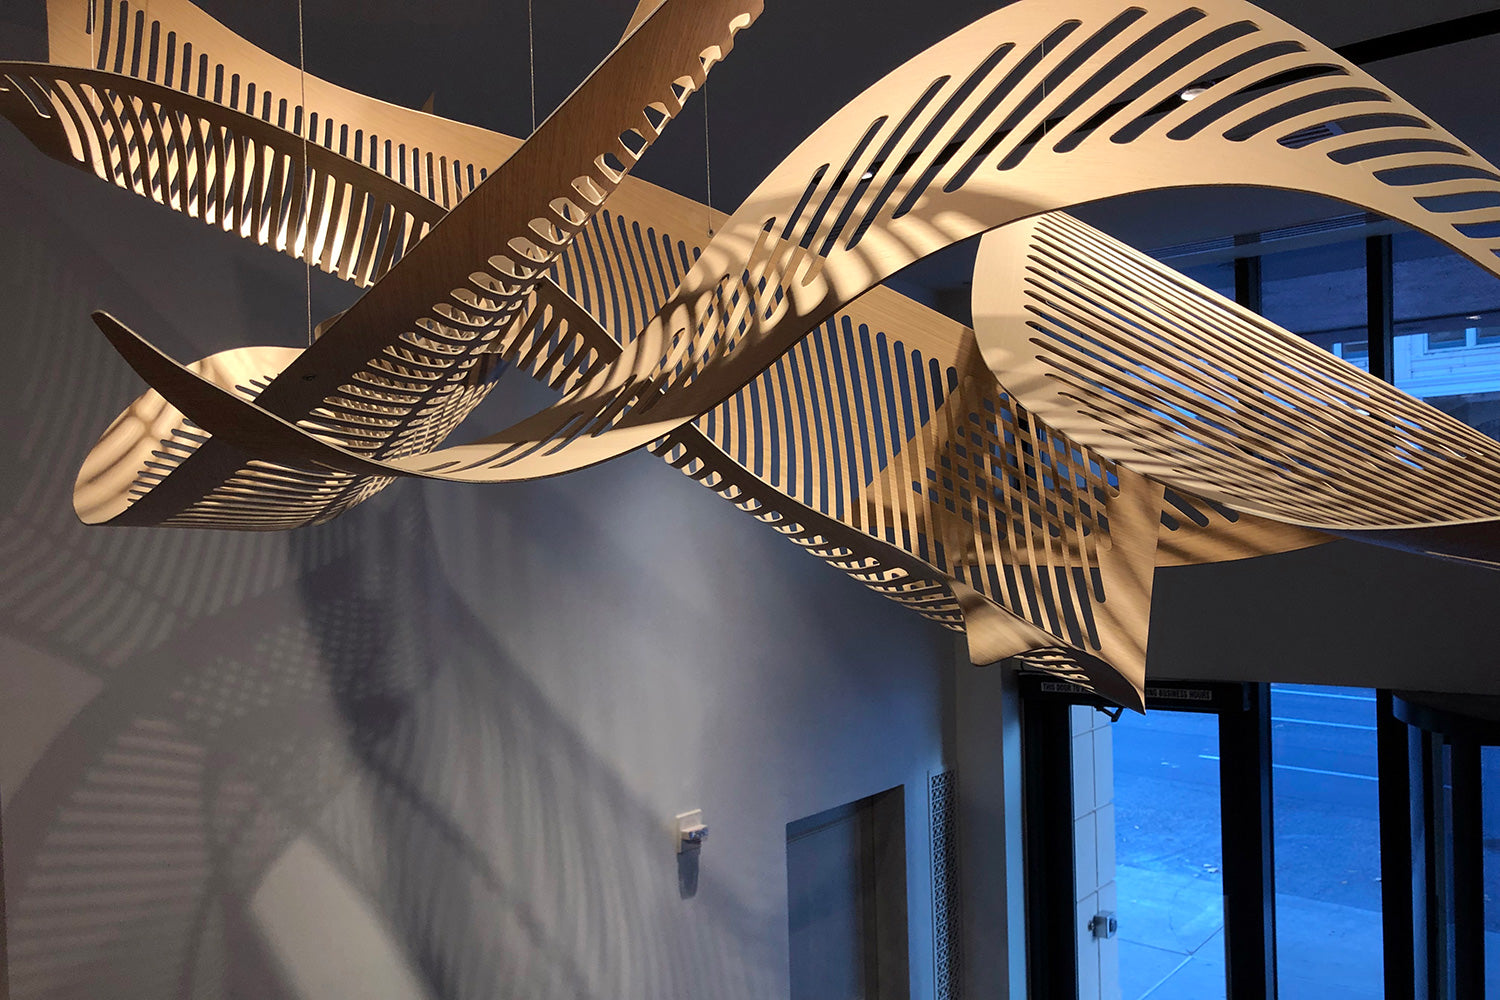 Twisted wood sculpture hanging from a ceiling